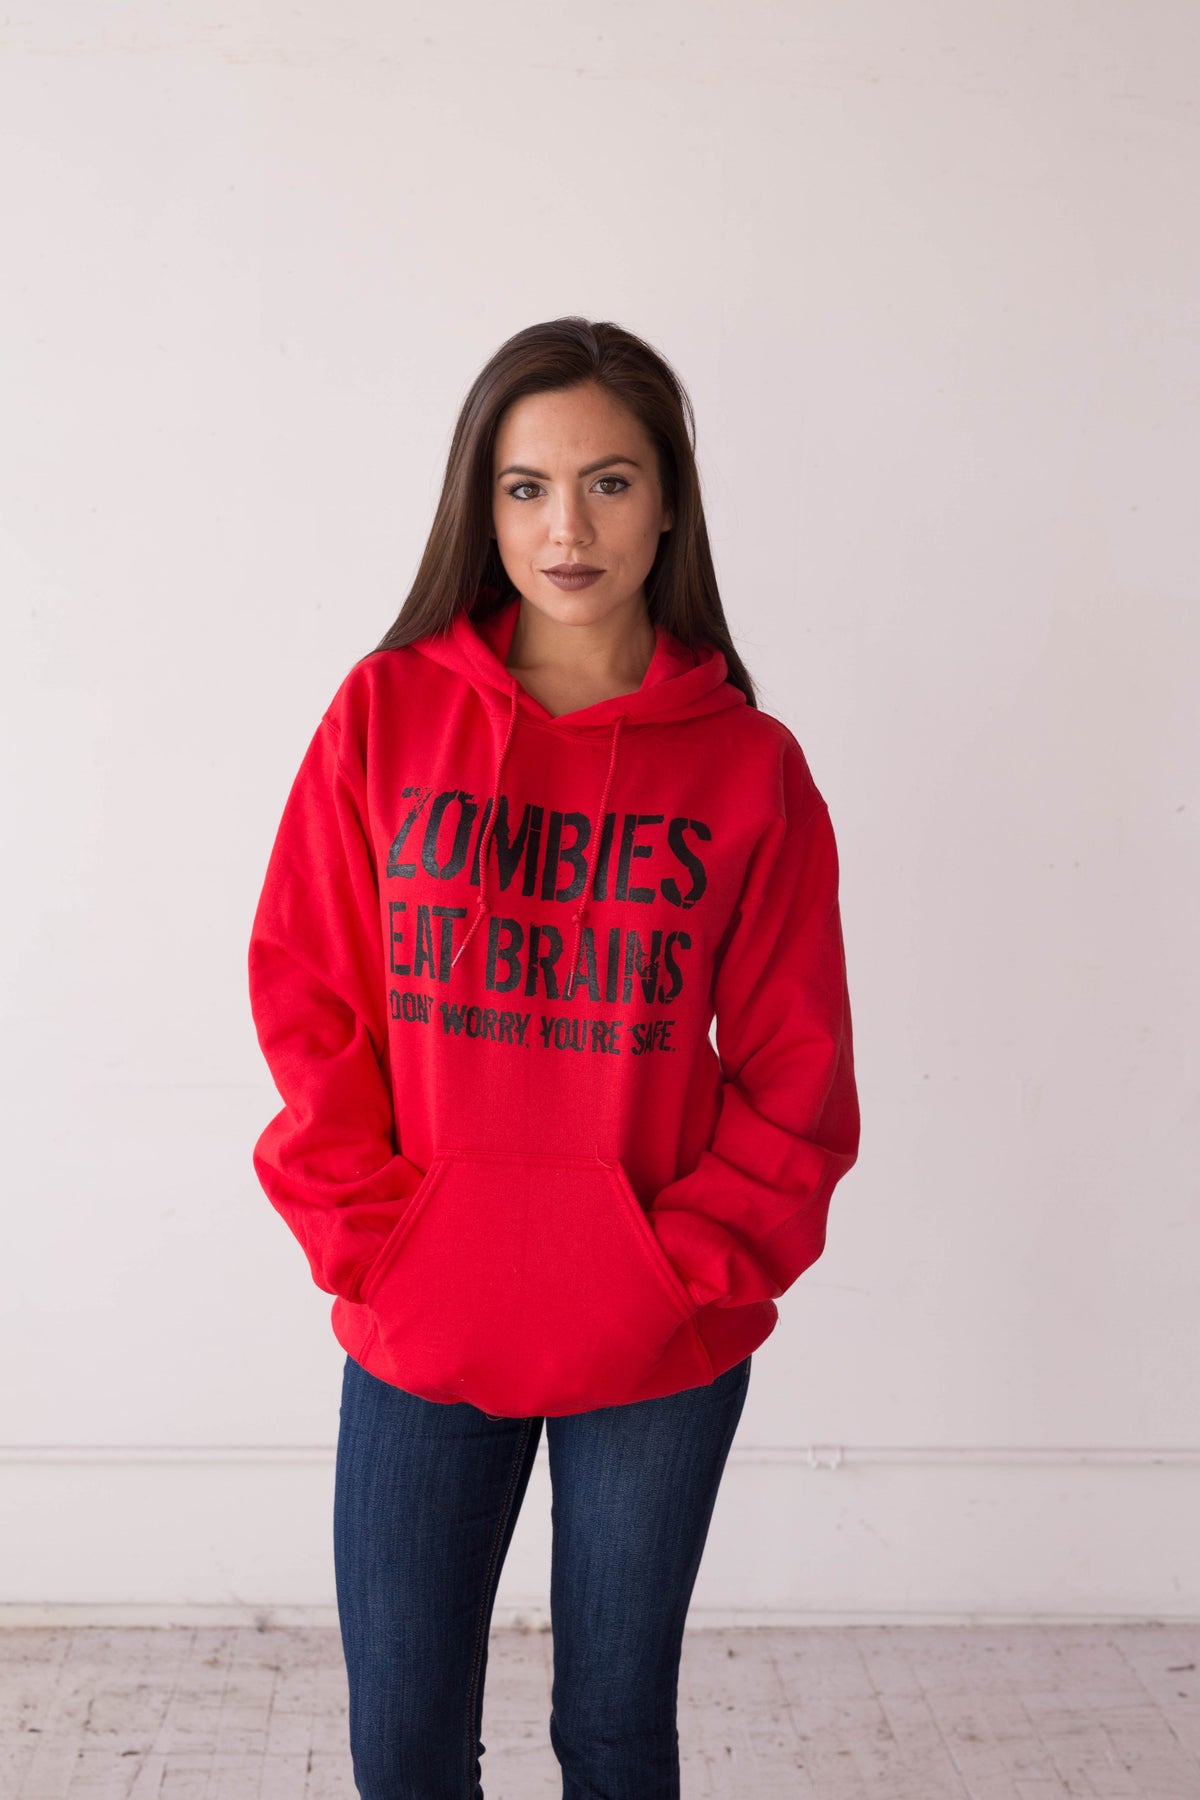 Zombies Eat Brains, You&#39;re Safe Hoodie